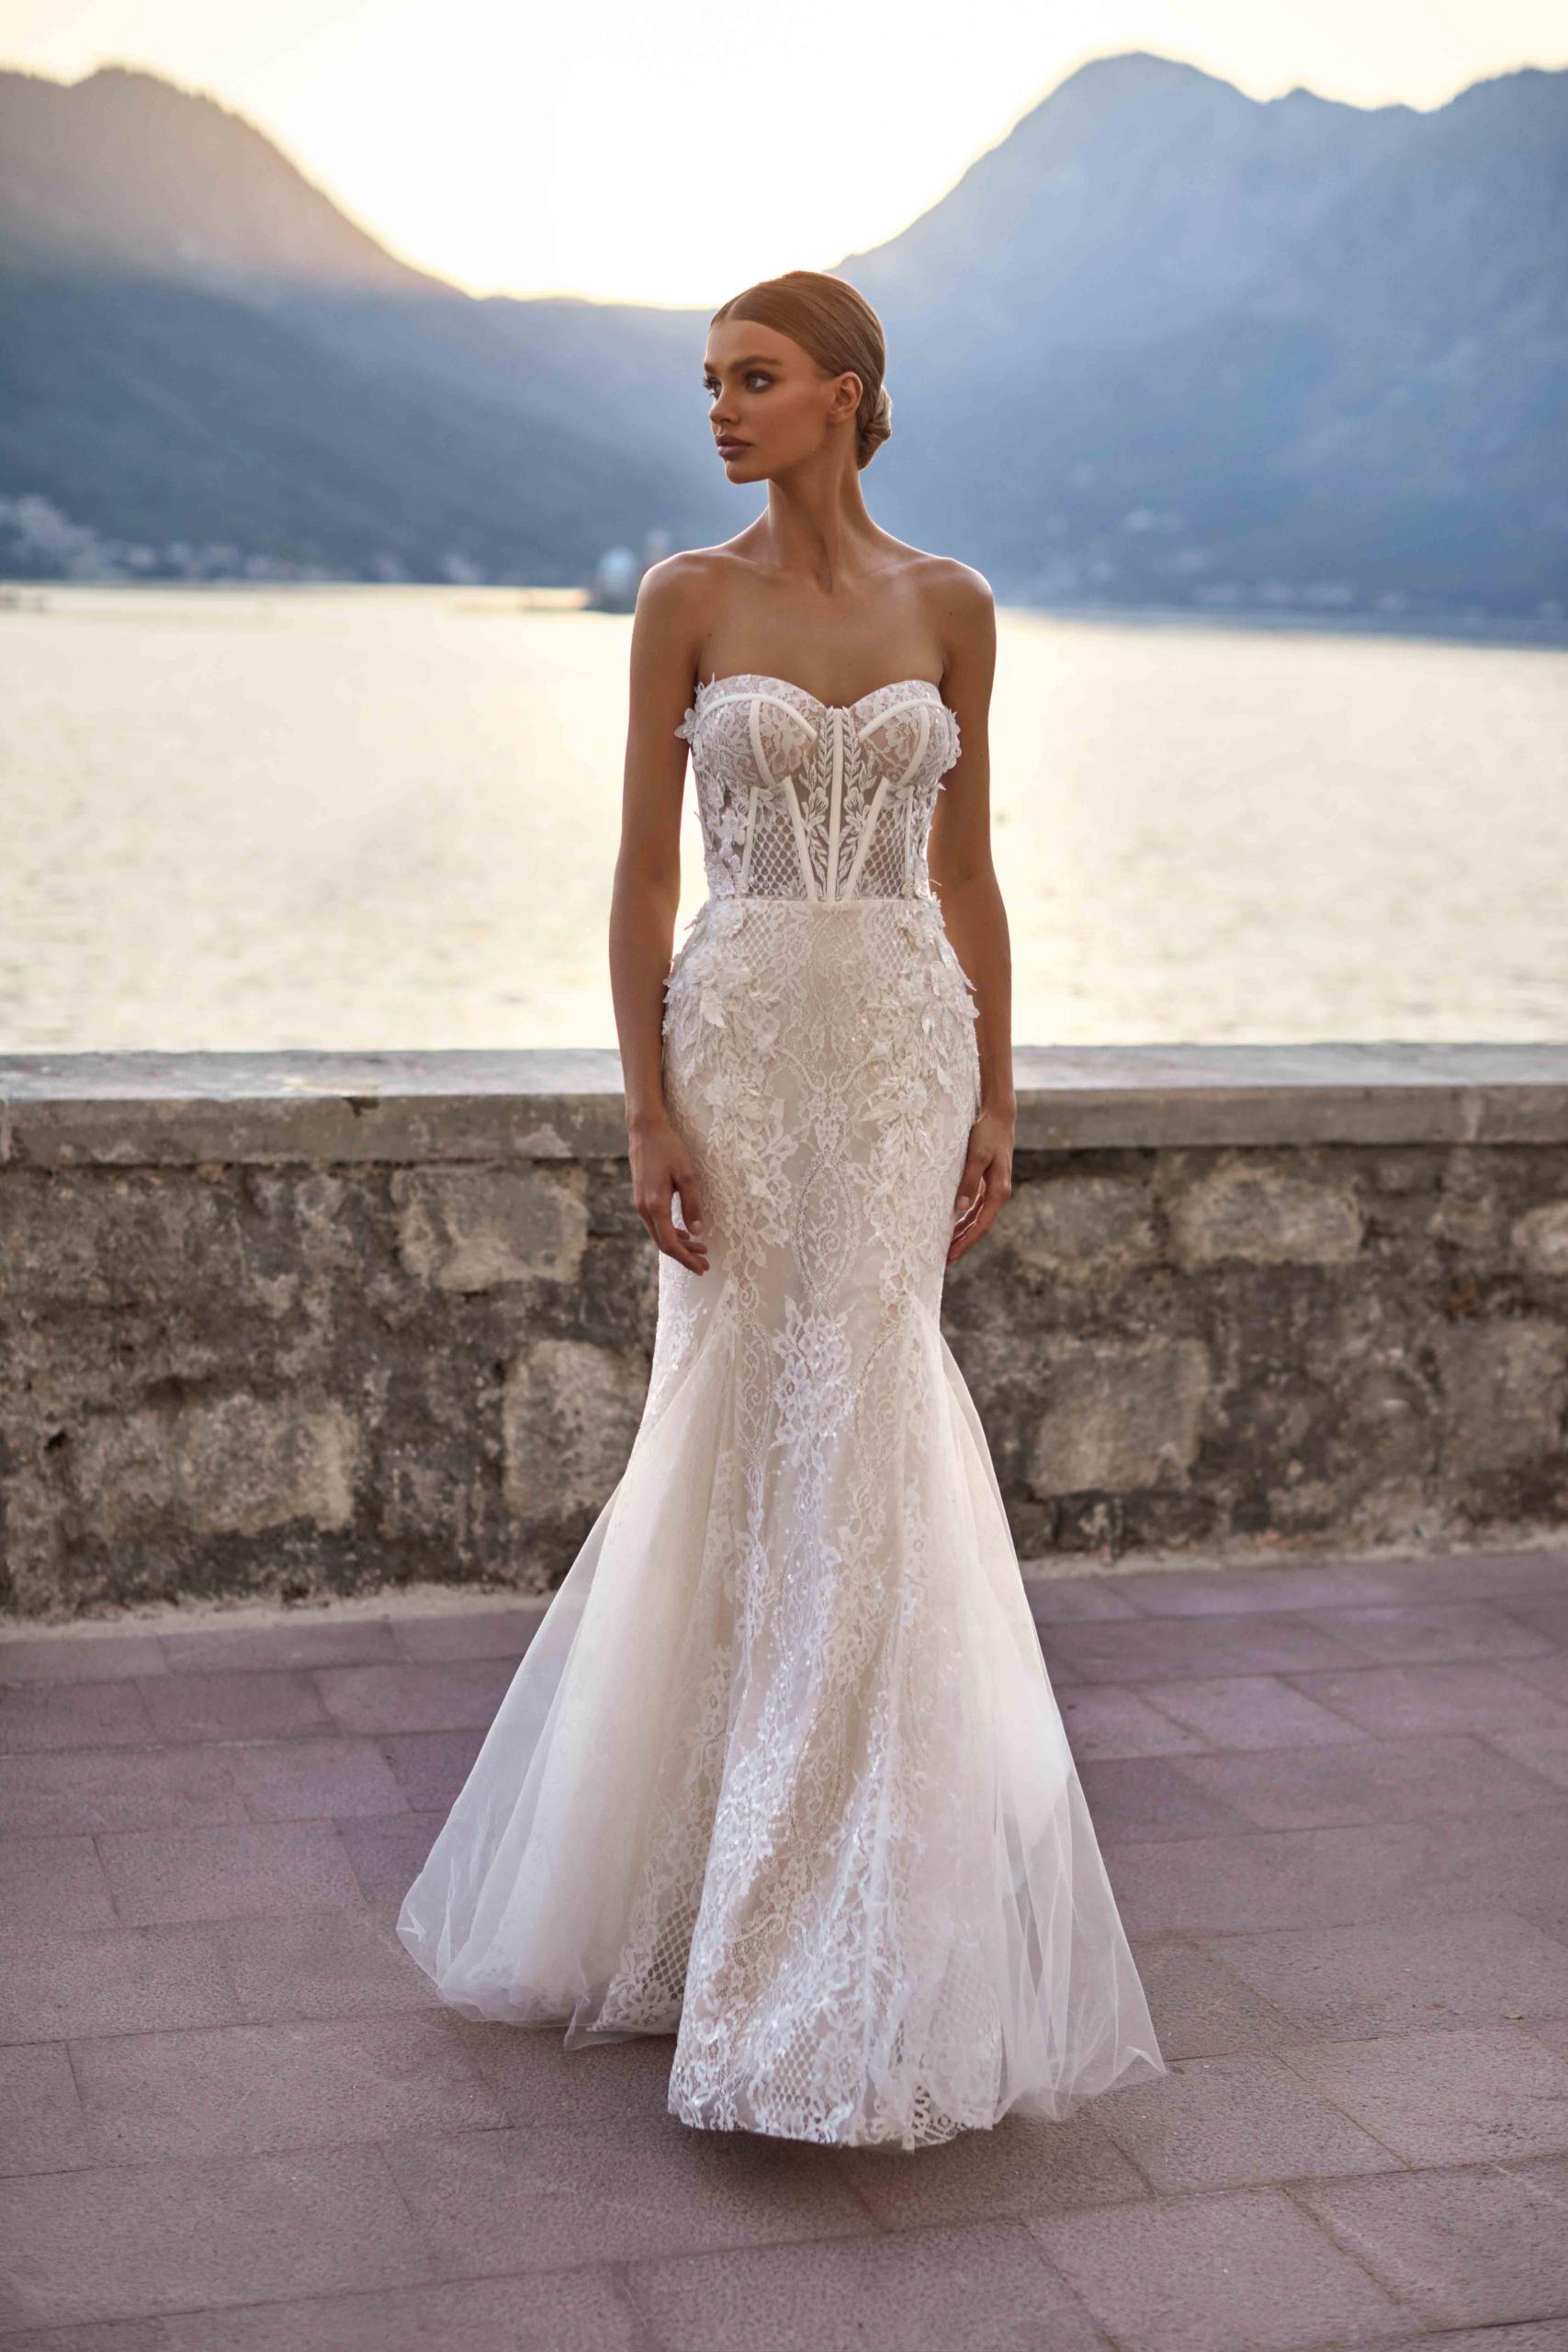 Fausa Lace Mermaid Wedding Gown by Milla Nova